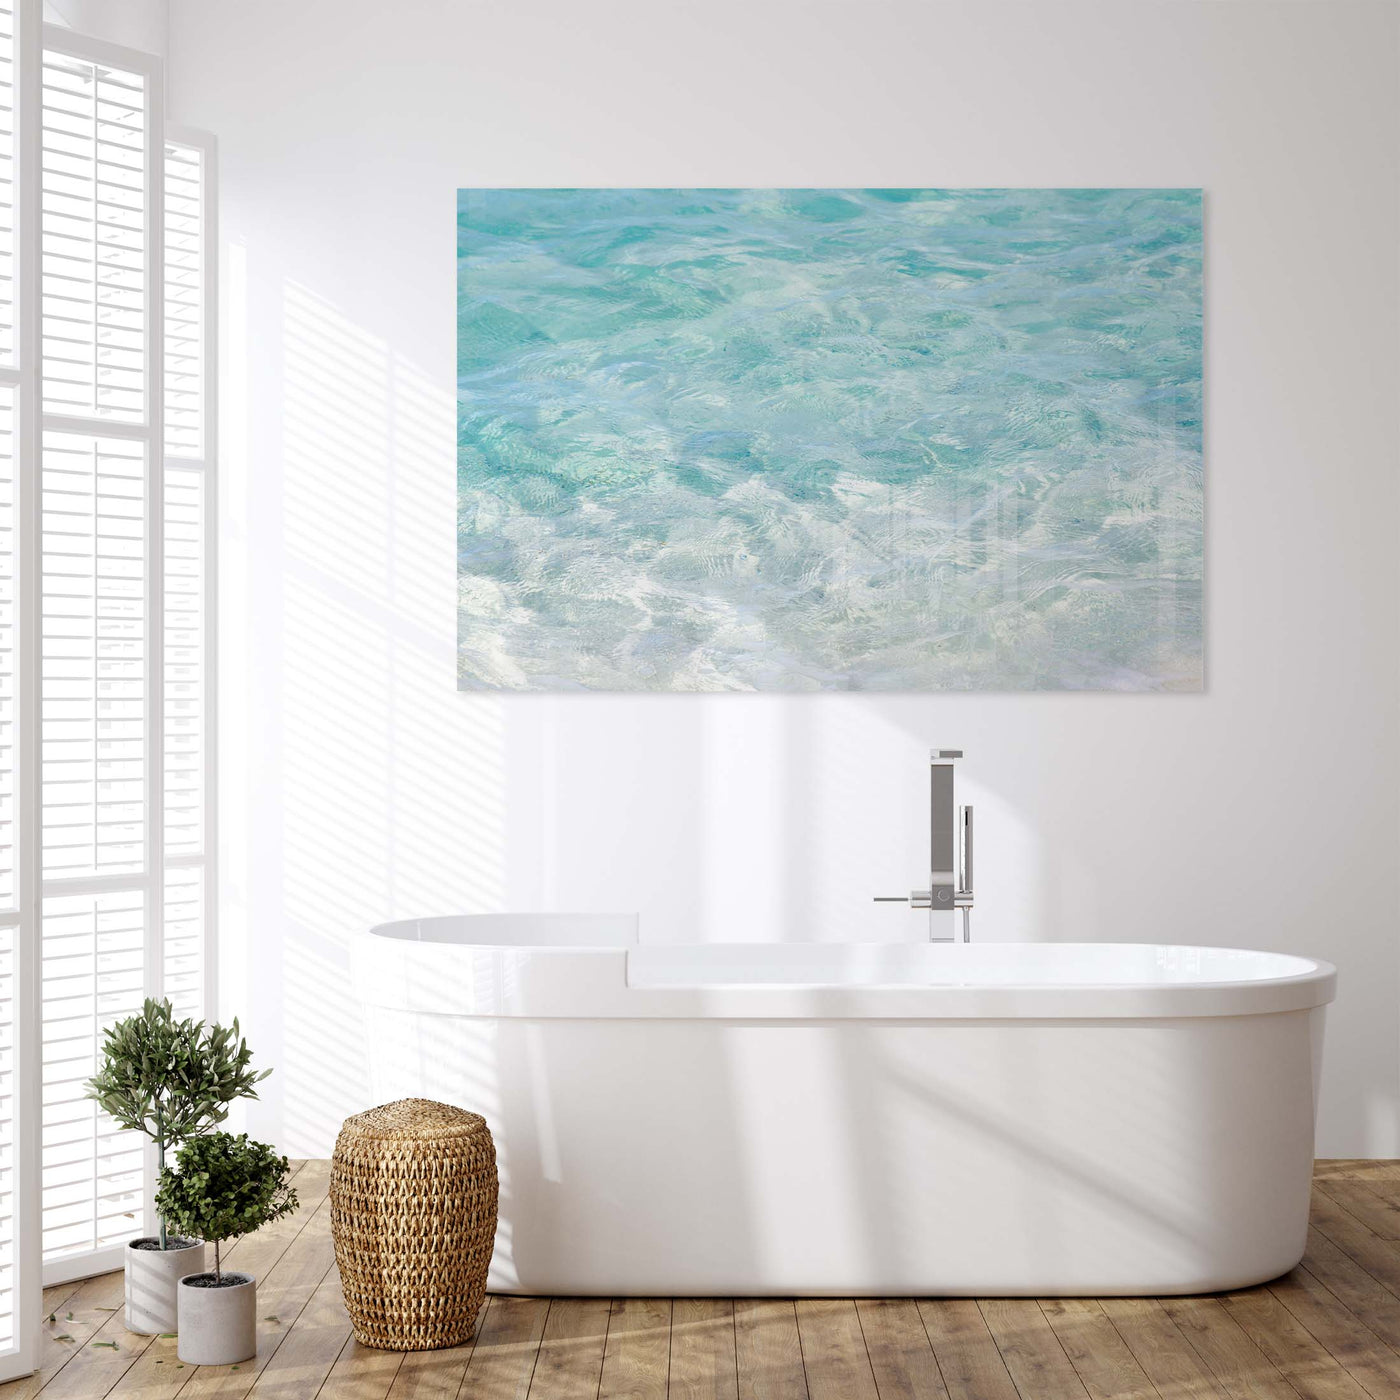 Turquoise Water - Acrylic glass print by Cattie Coyle Photography in bathroom